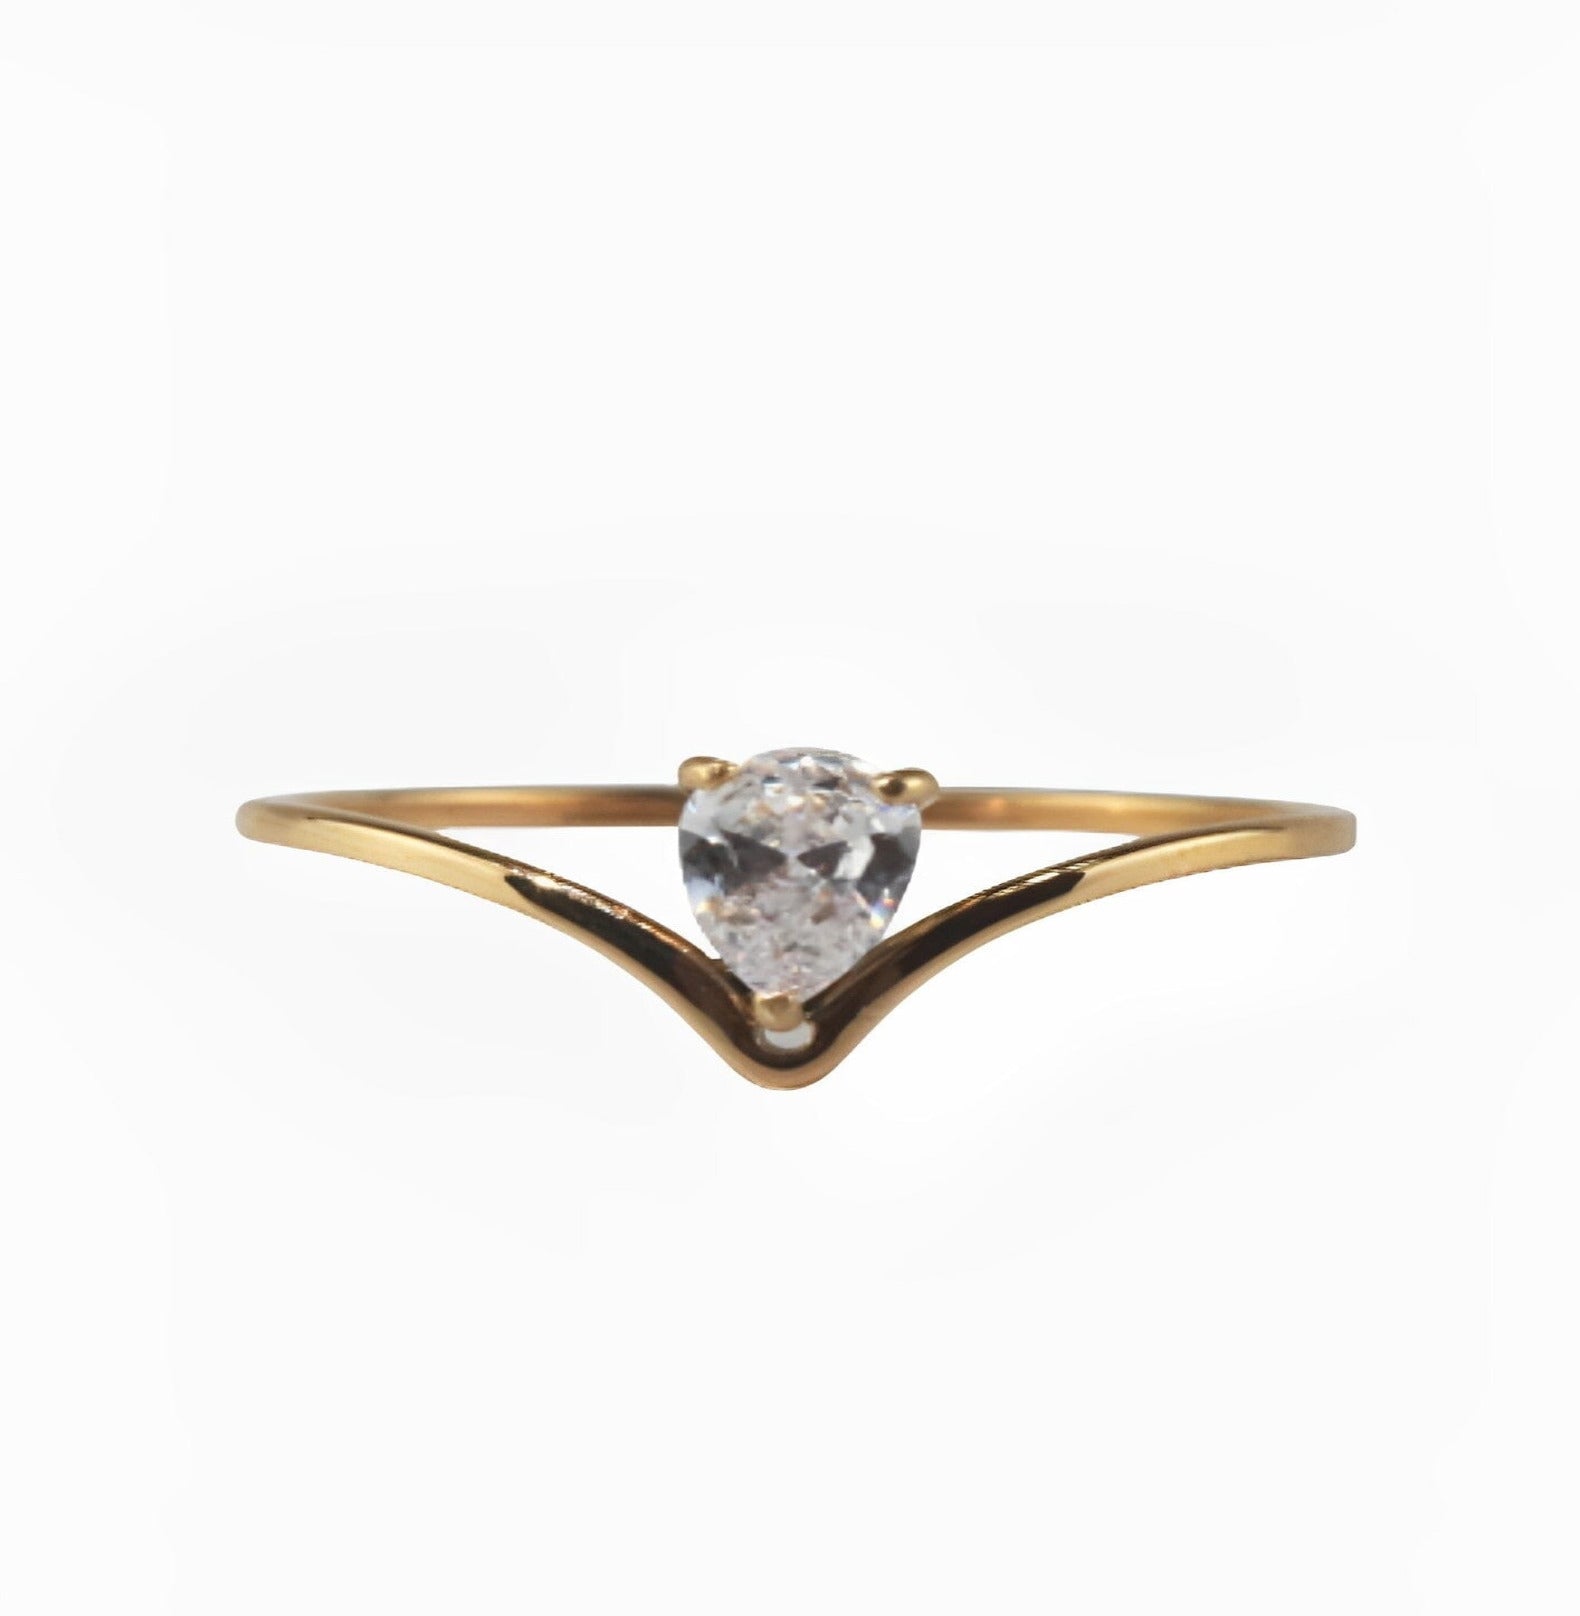 TEAR RING ring Yubama Jewelry Online Store - The Elegant Designs of Gold and Silver ! 